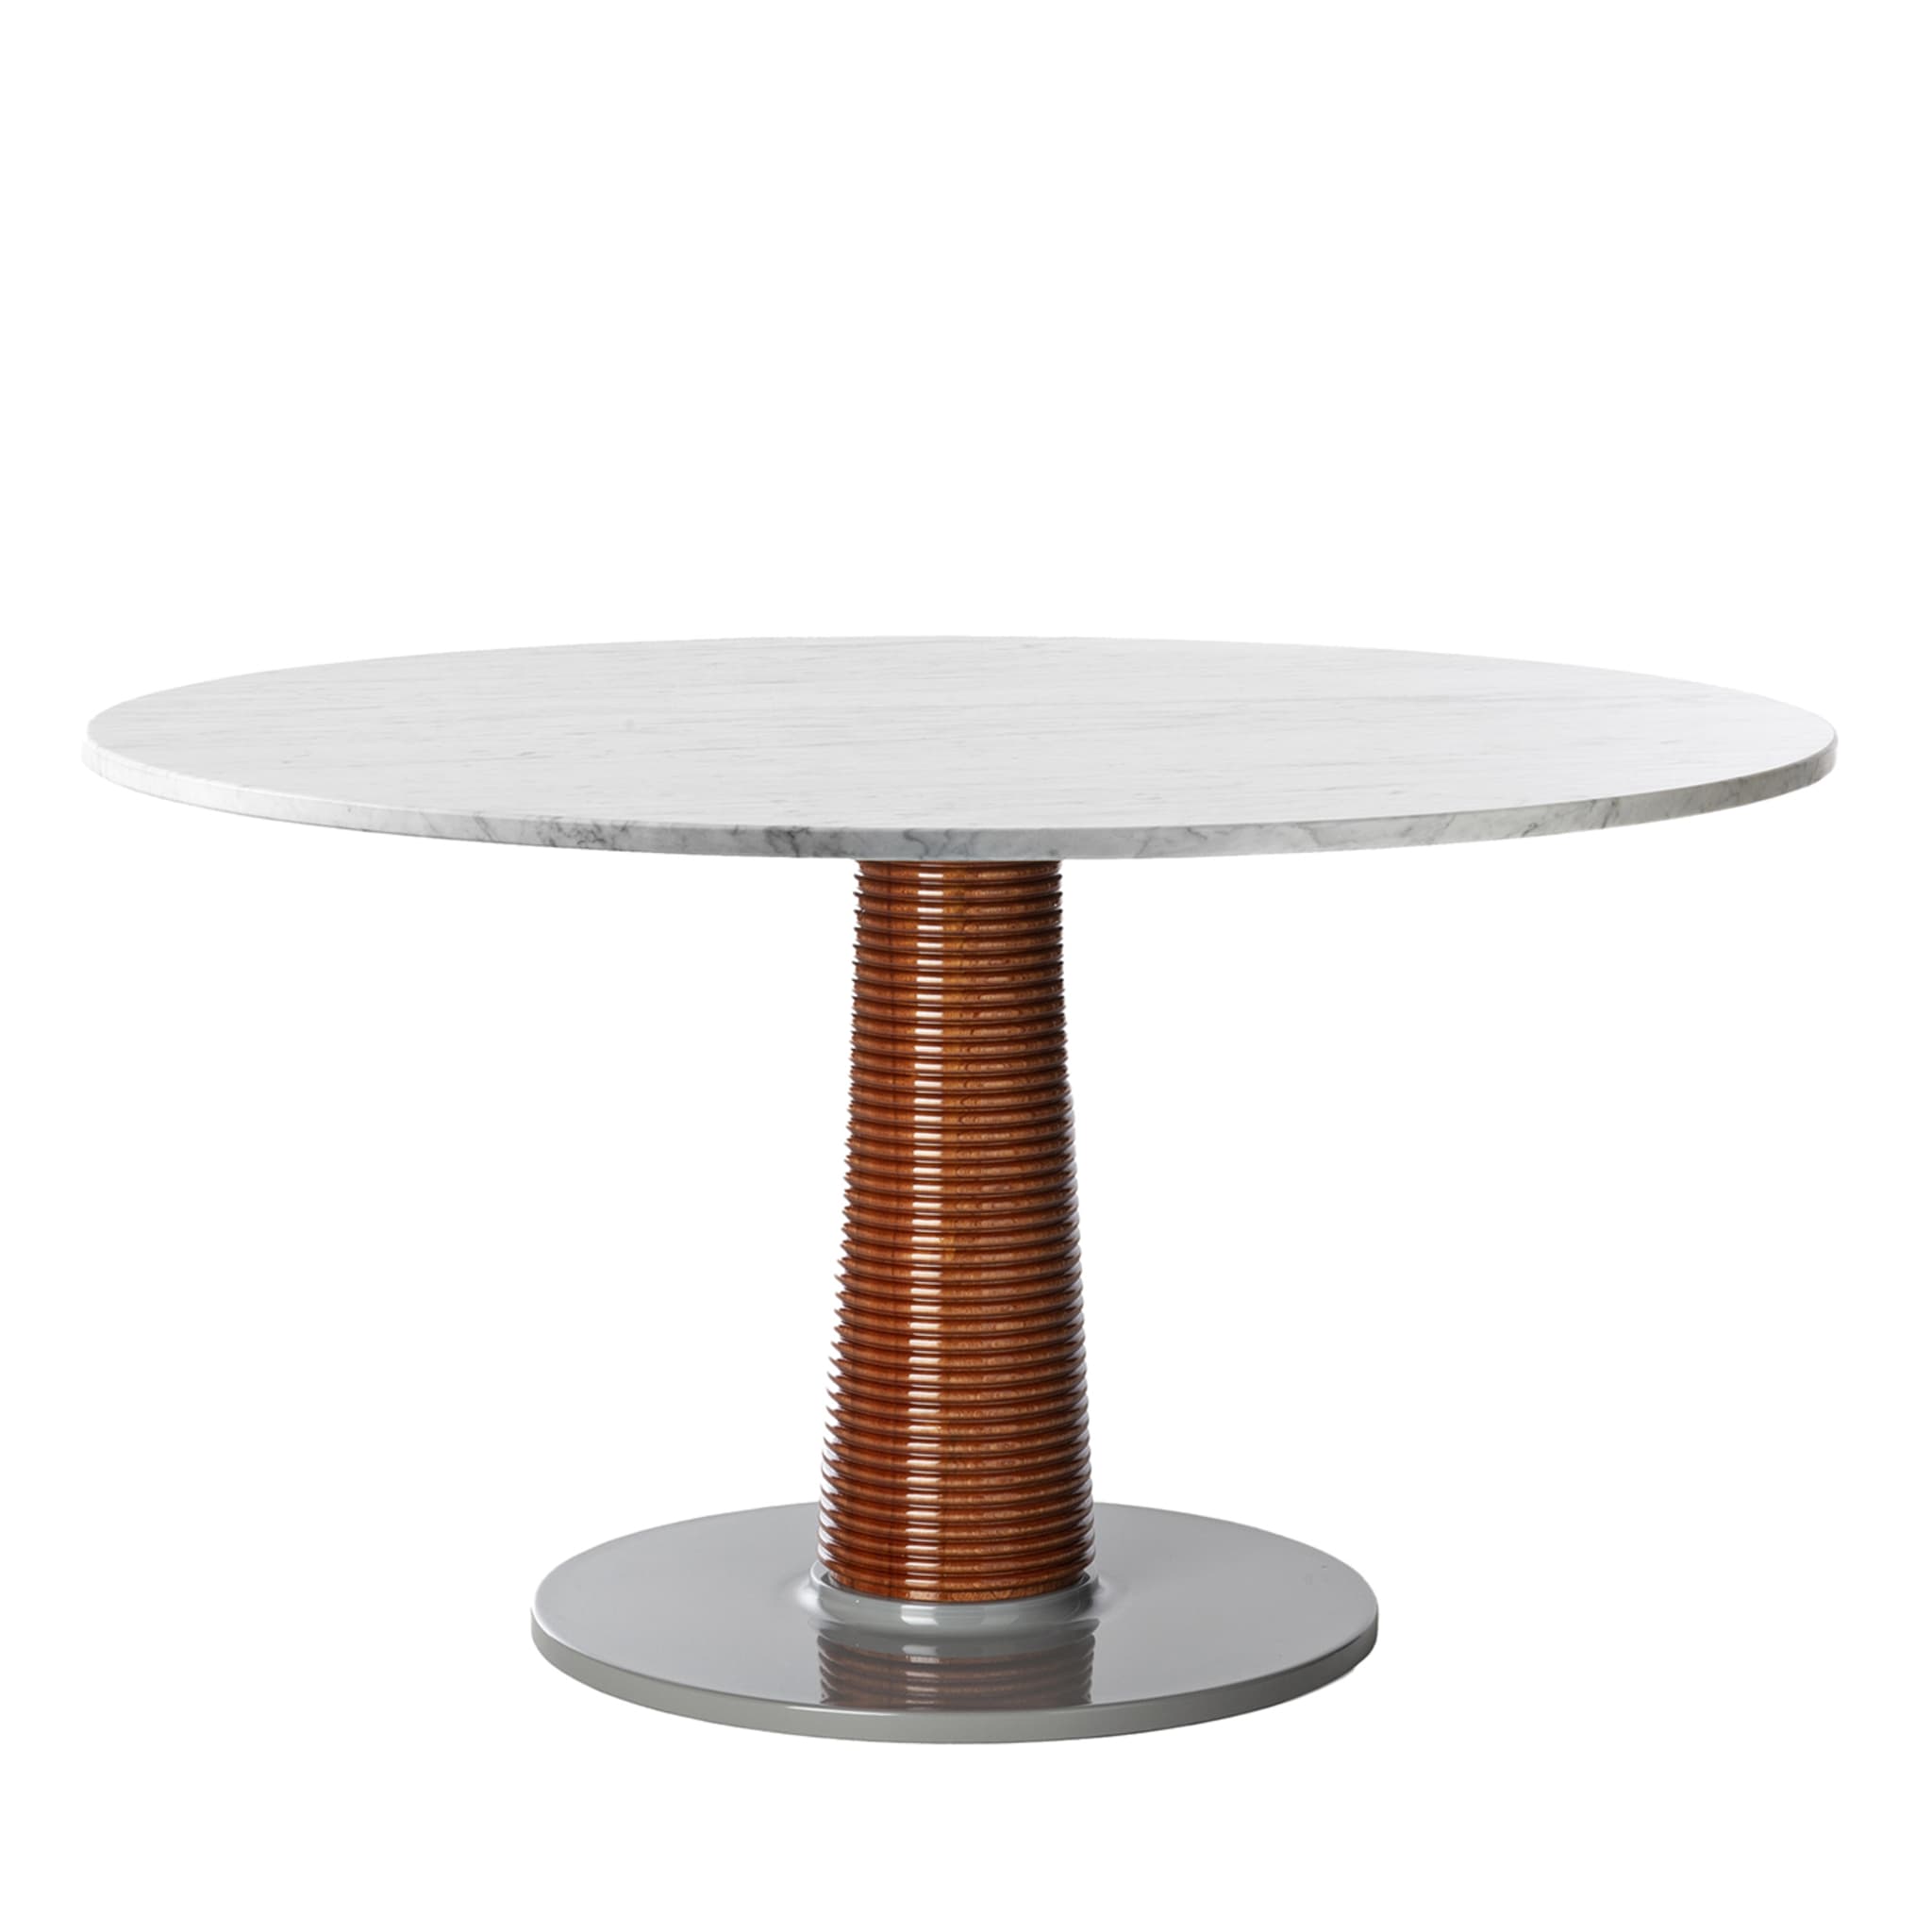 Sunset Lounge Lucido Mediterraneo Mahogany Dining Table + Carrara by Paola Navone - Main view